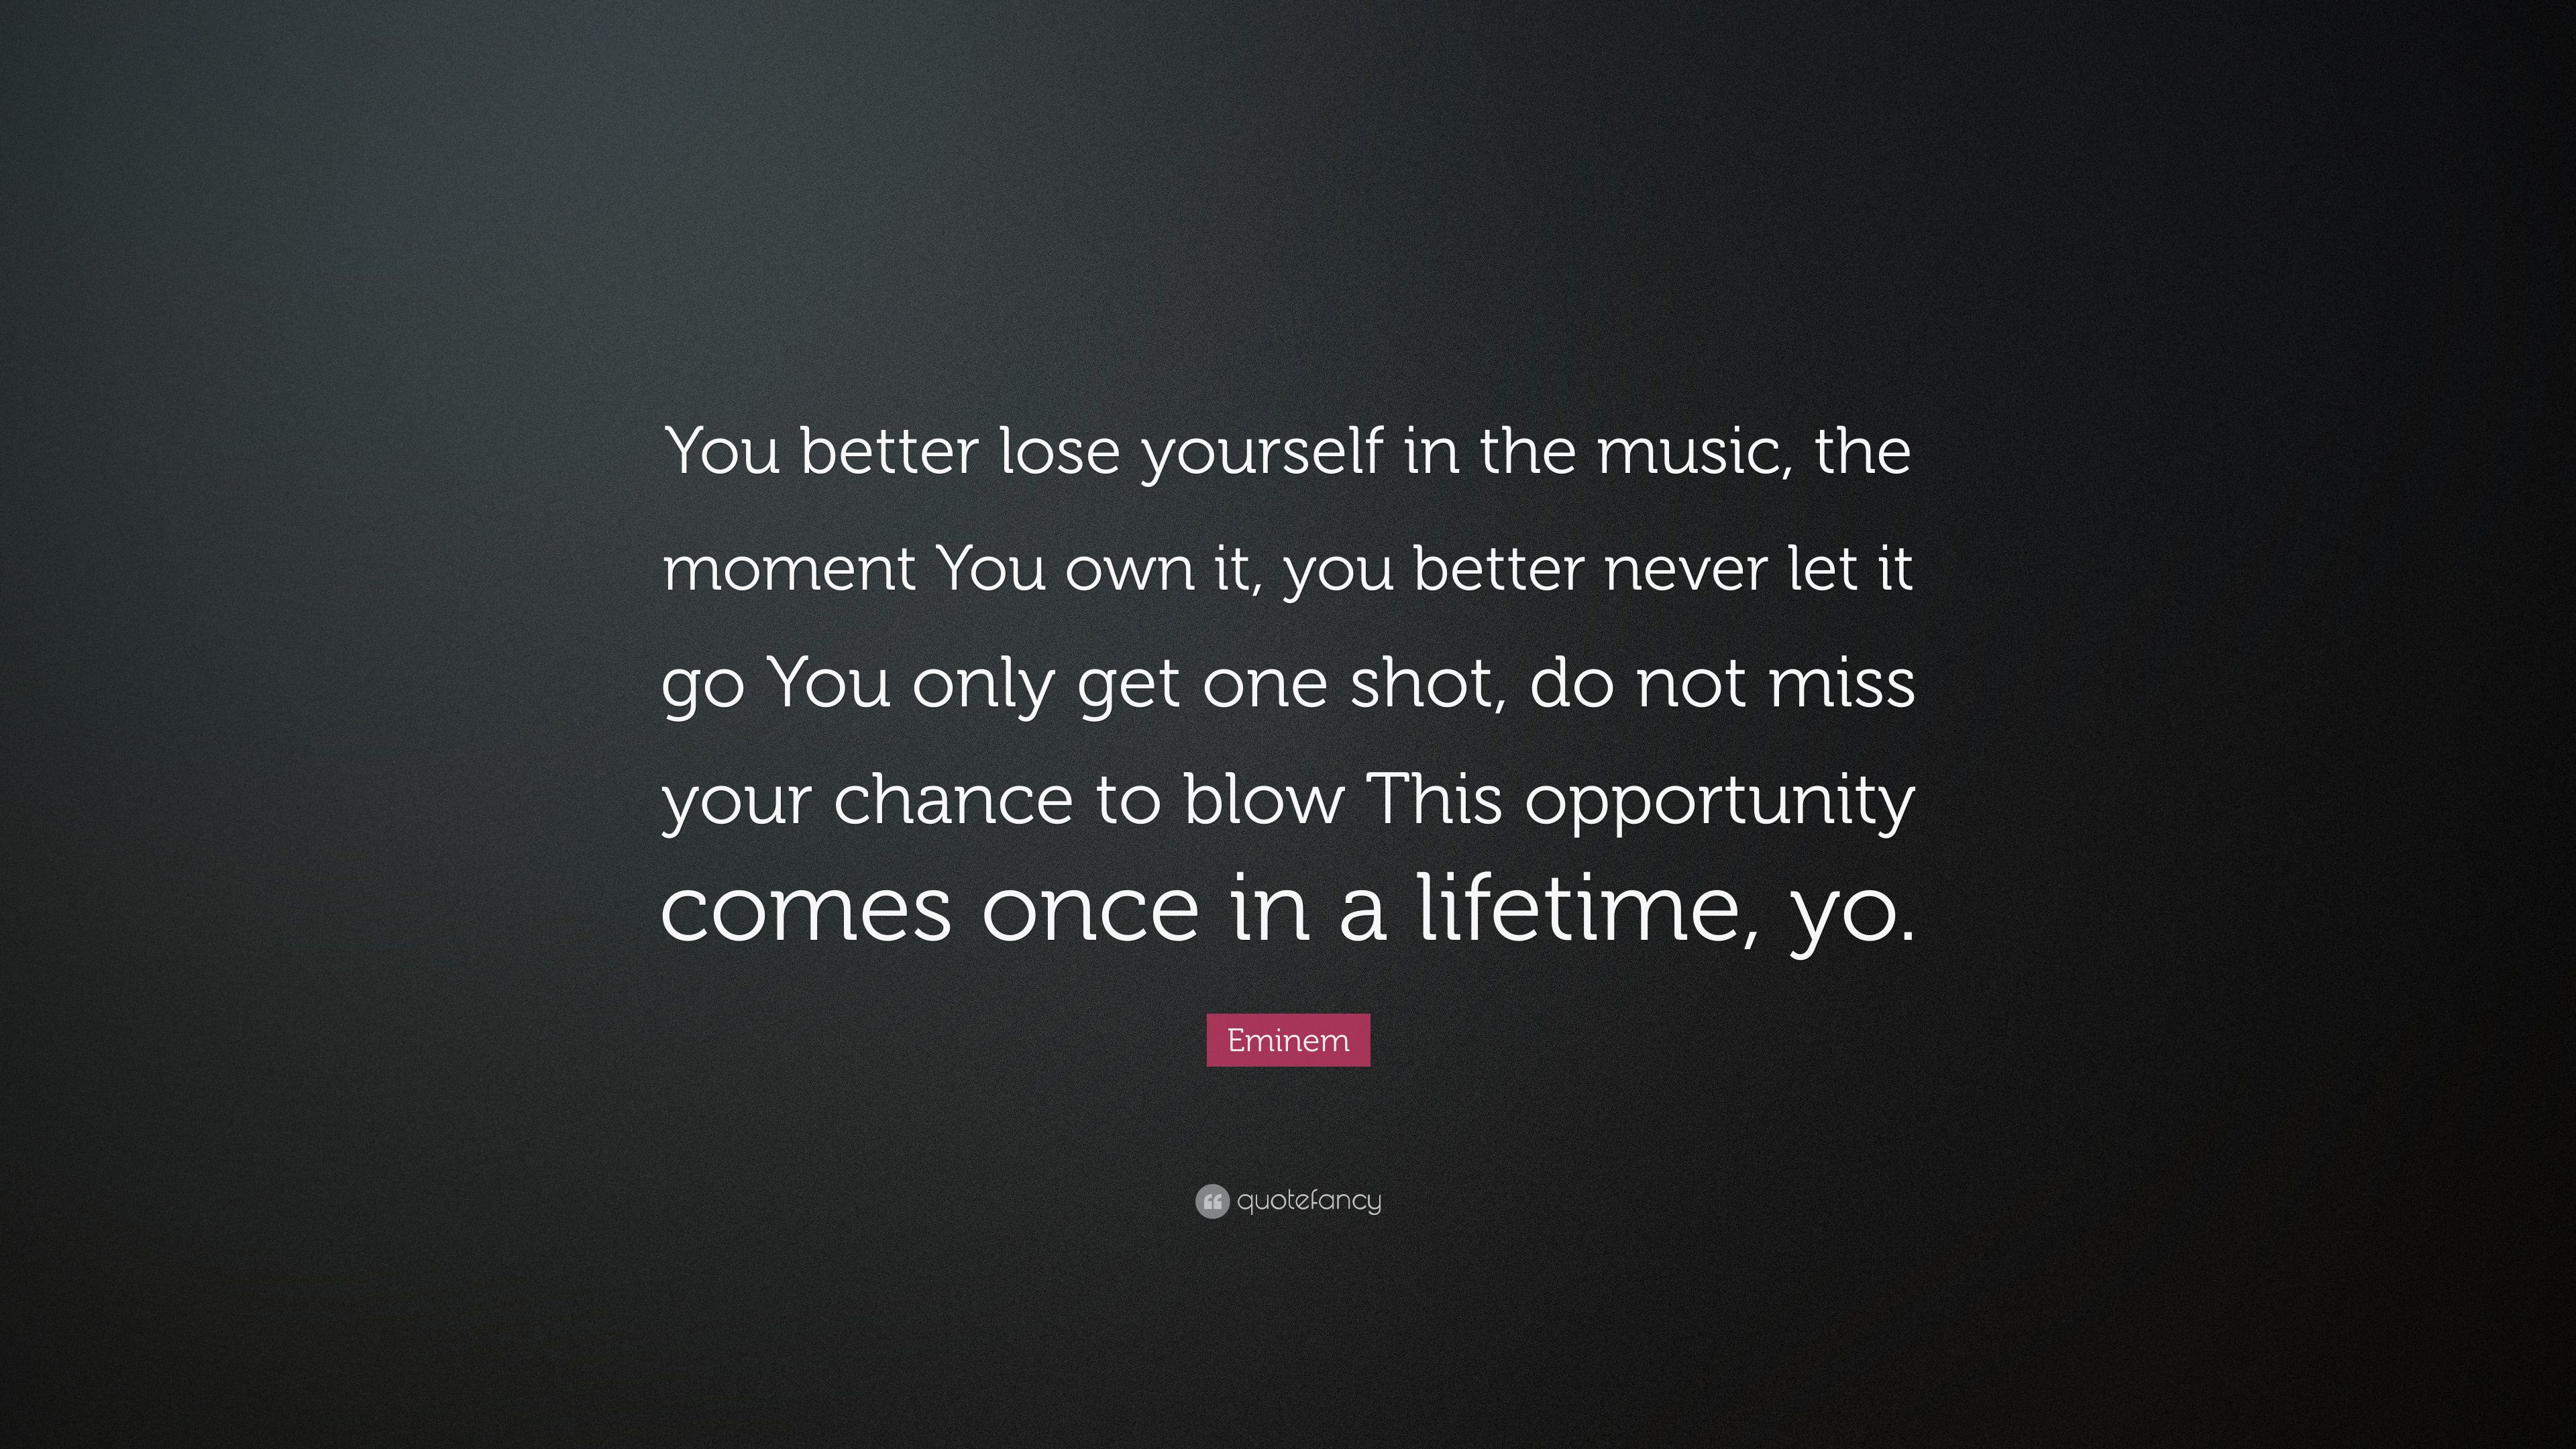 Eminem Quote: “You better lose yourself in the music, the moment You own it, you better never let it go You only get one shot, do not m.”